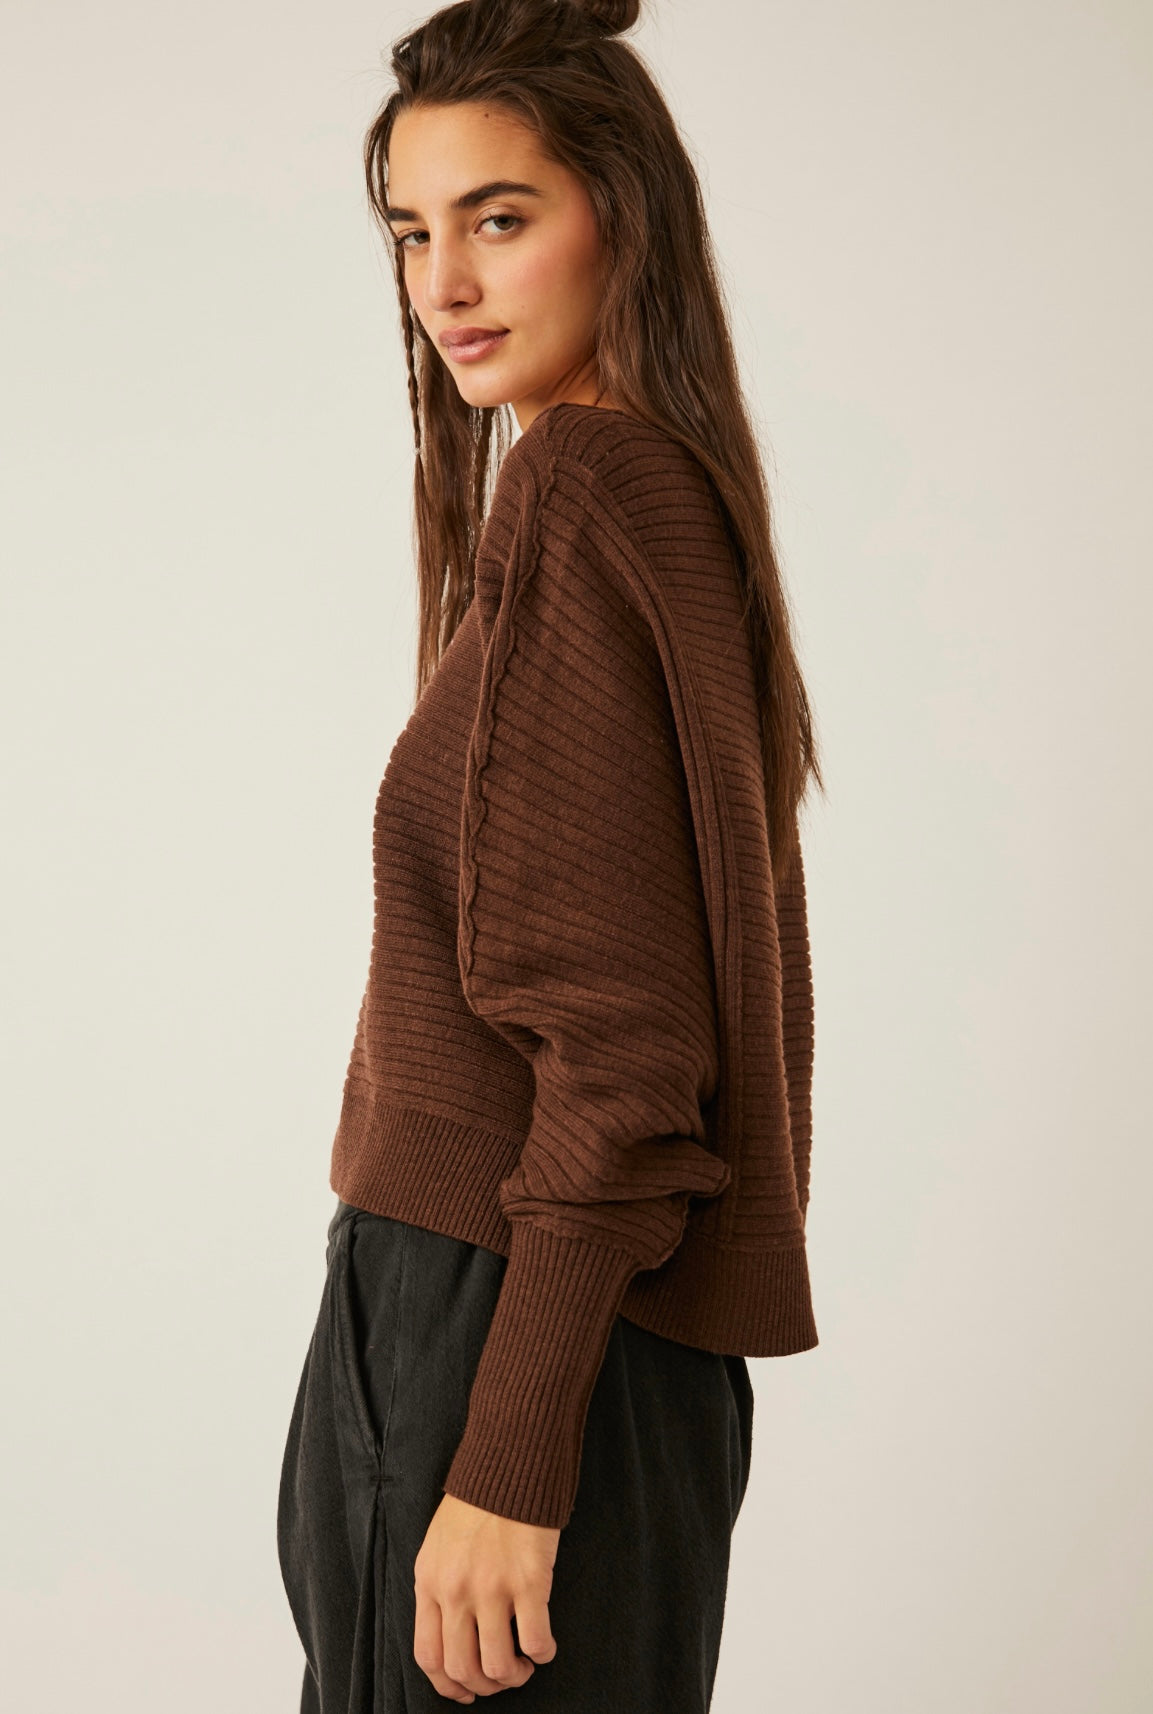 Free People Sublime Pullover